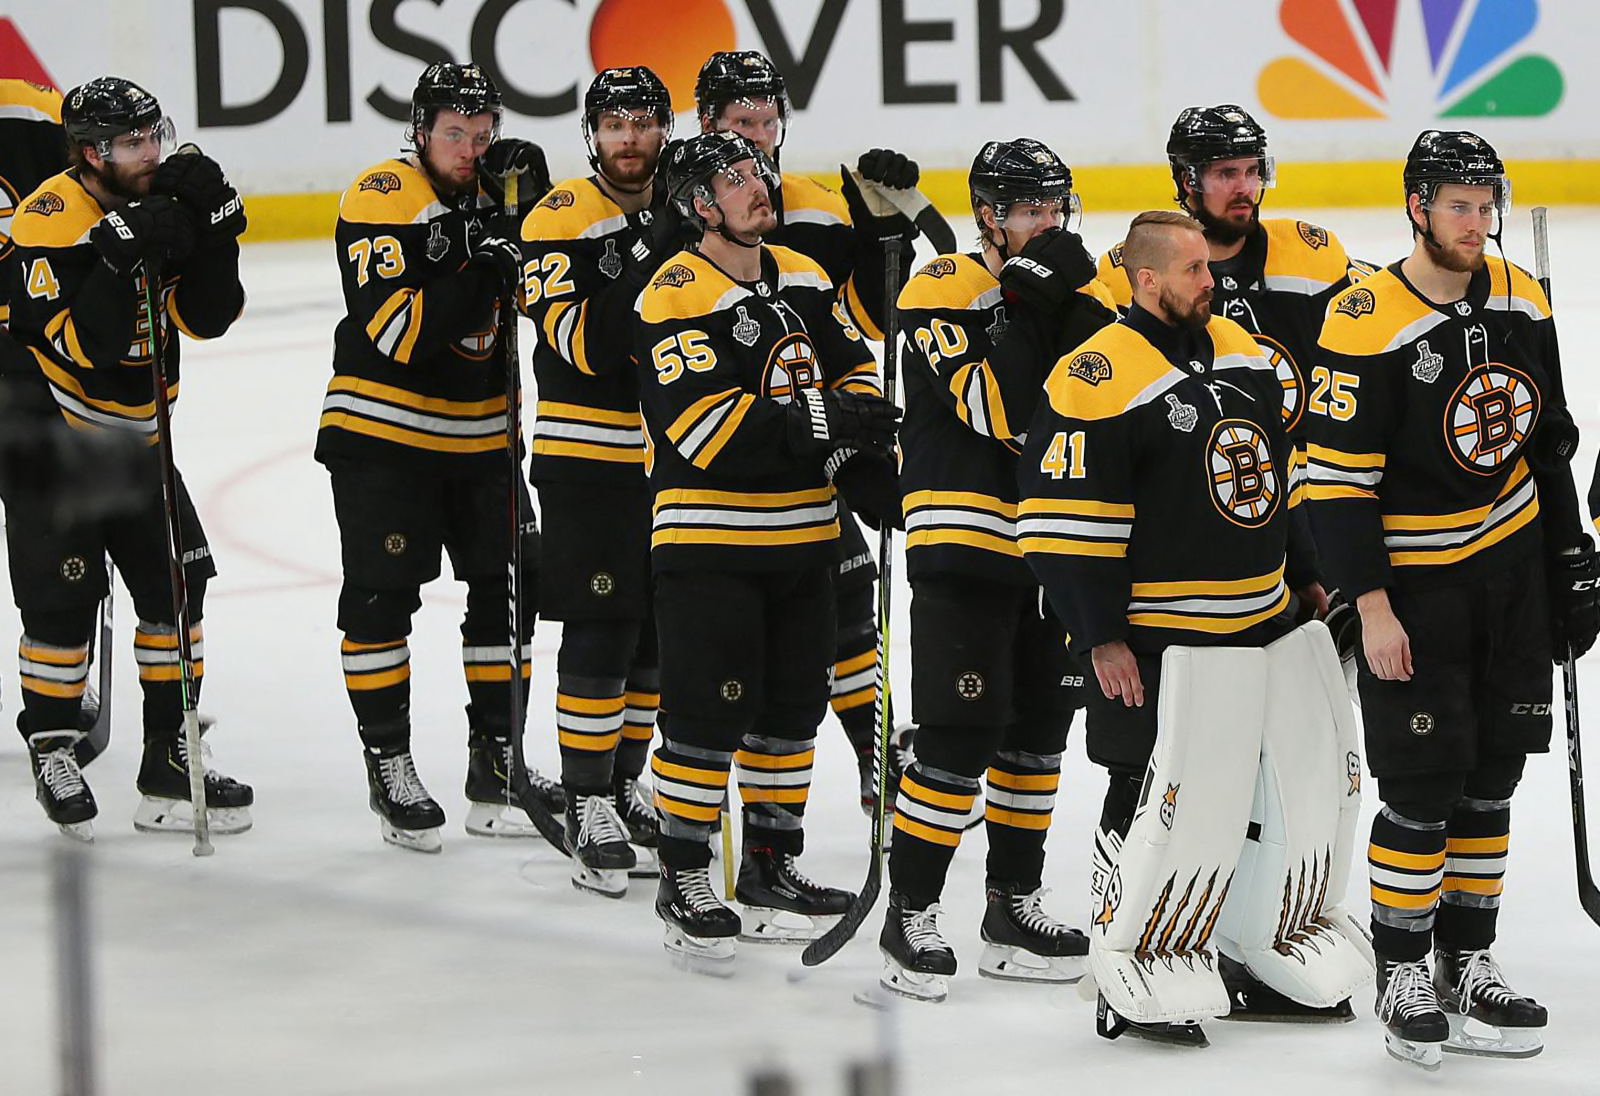 June 15, 2011: 39-Year Boston Bruins Stanley Cup Drought Ends